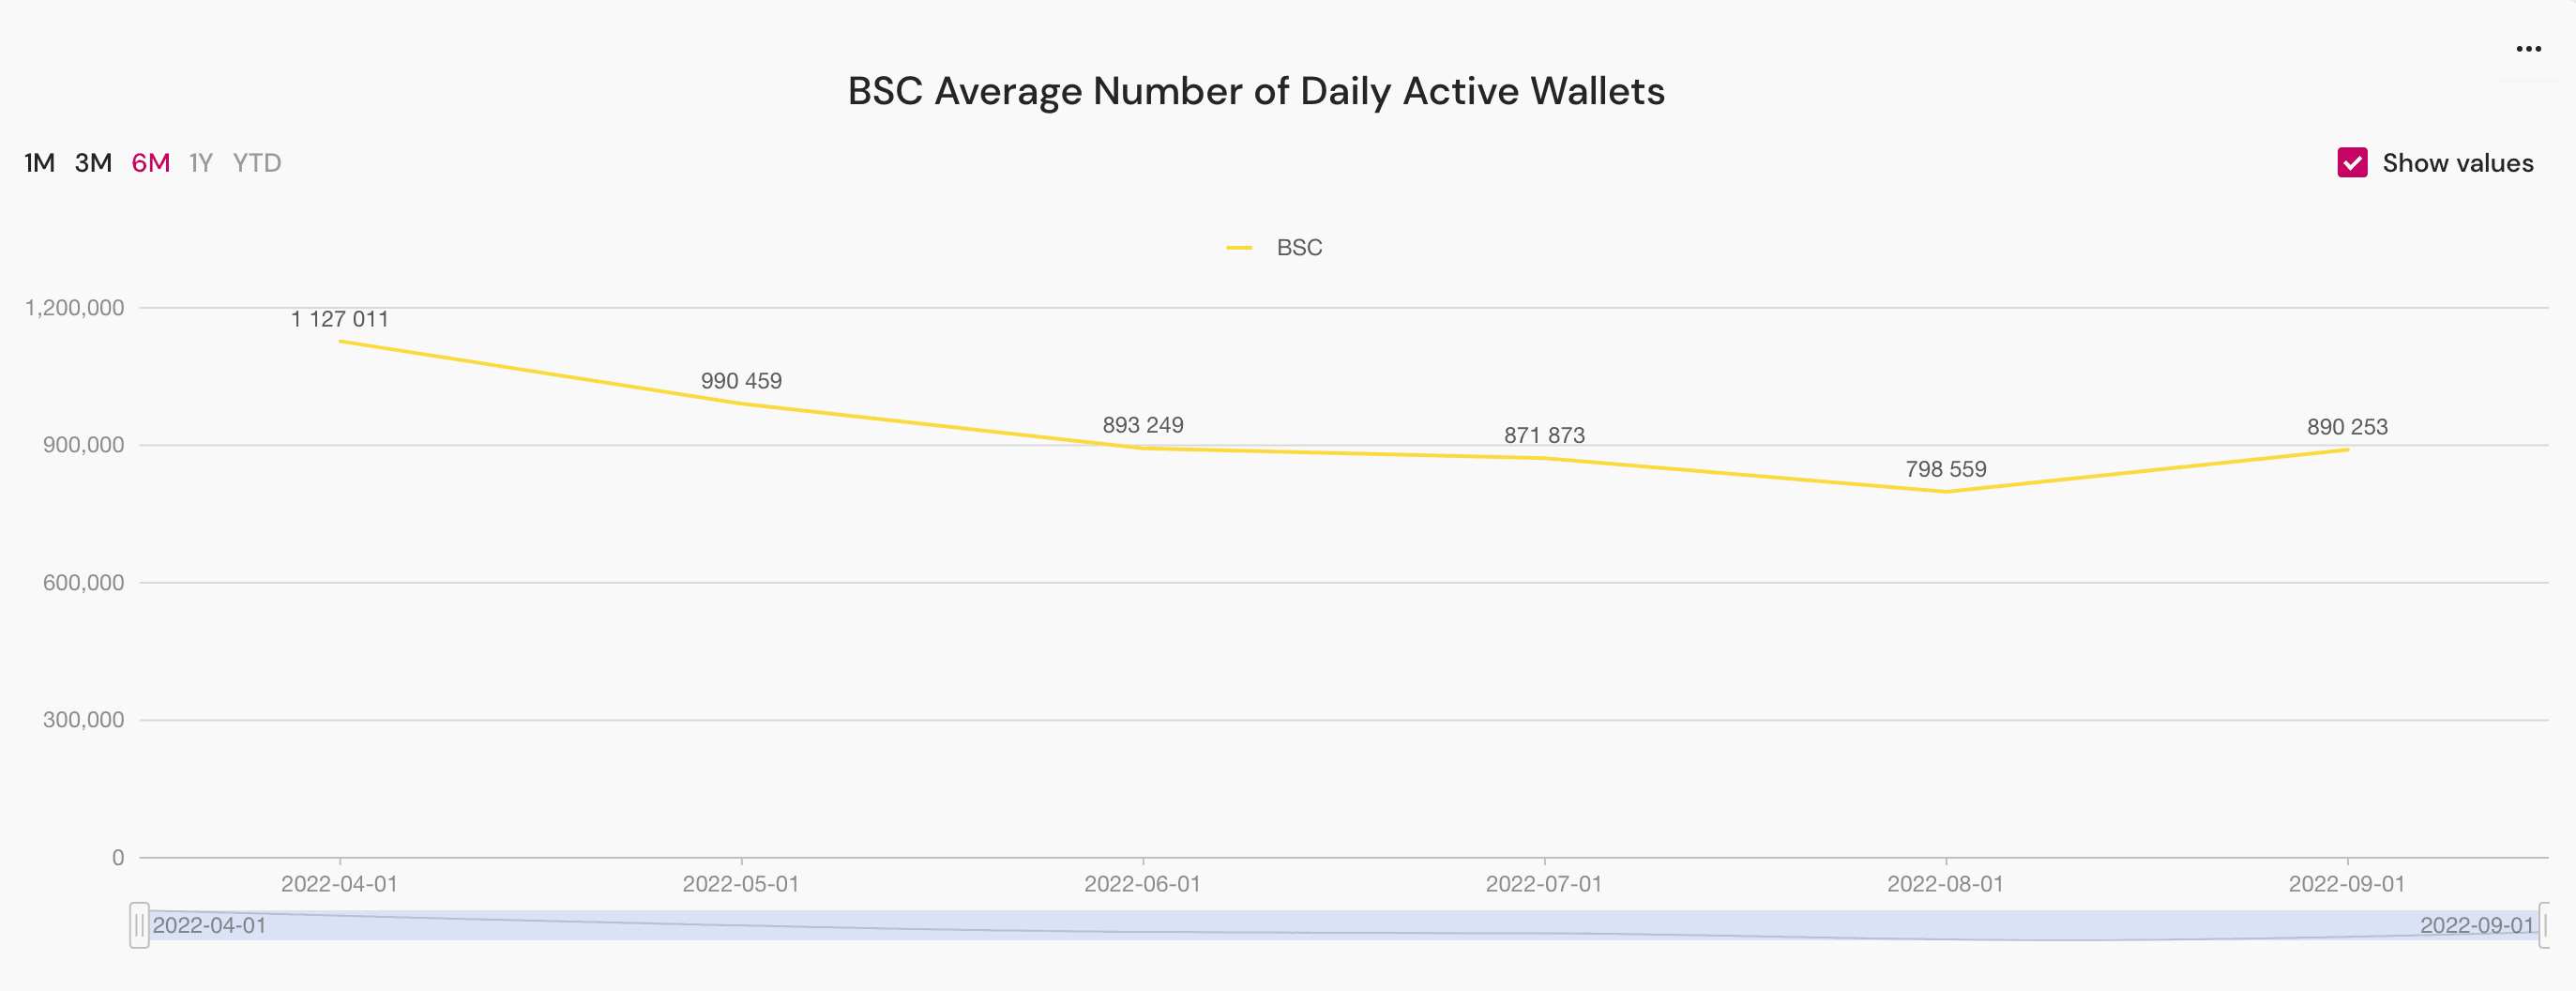 BSC average number of daily active wallets